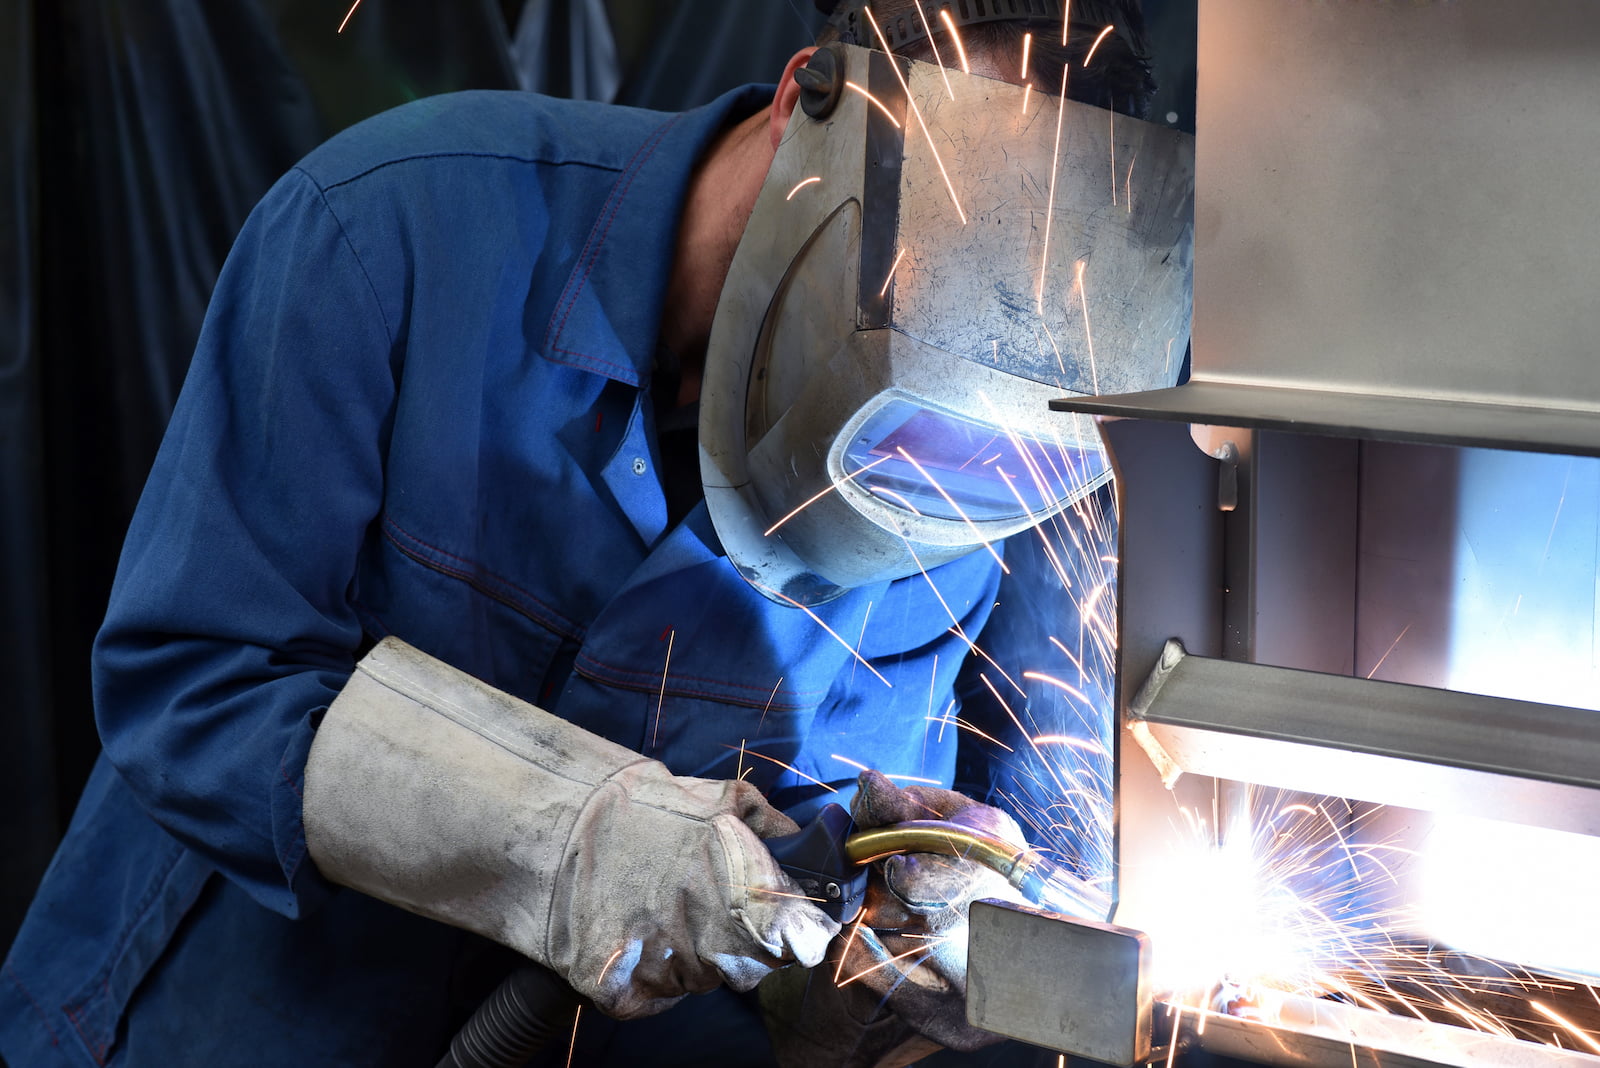 welder working on large metal project